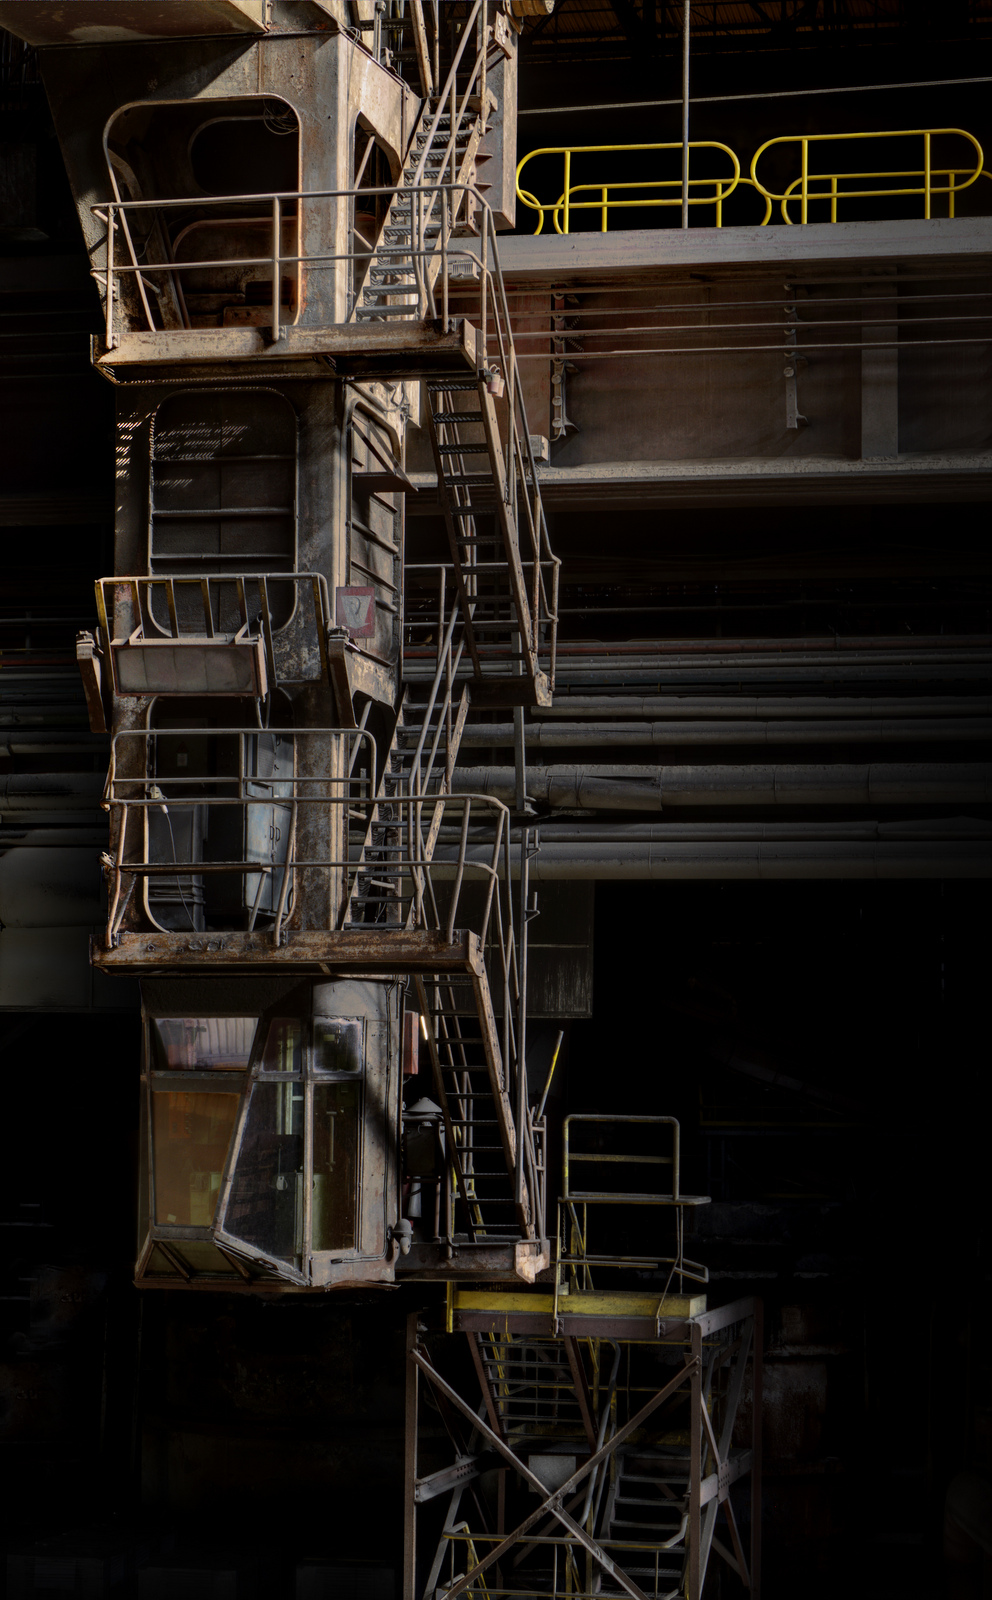 Steel work stairs. Photograph by Forgotten Heritage Photography. Used with permission.